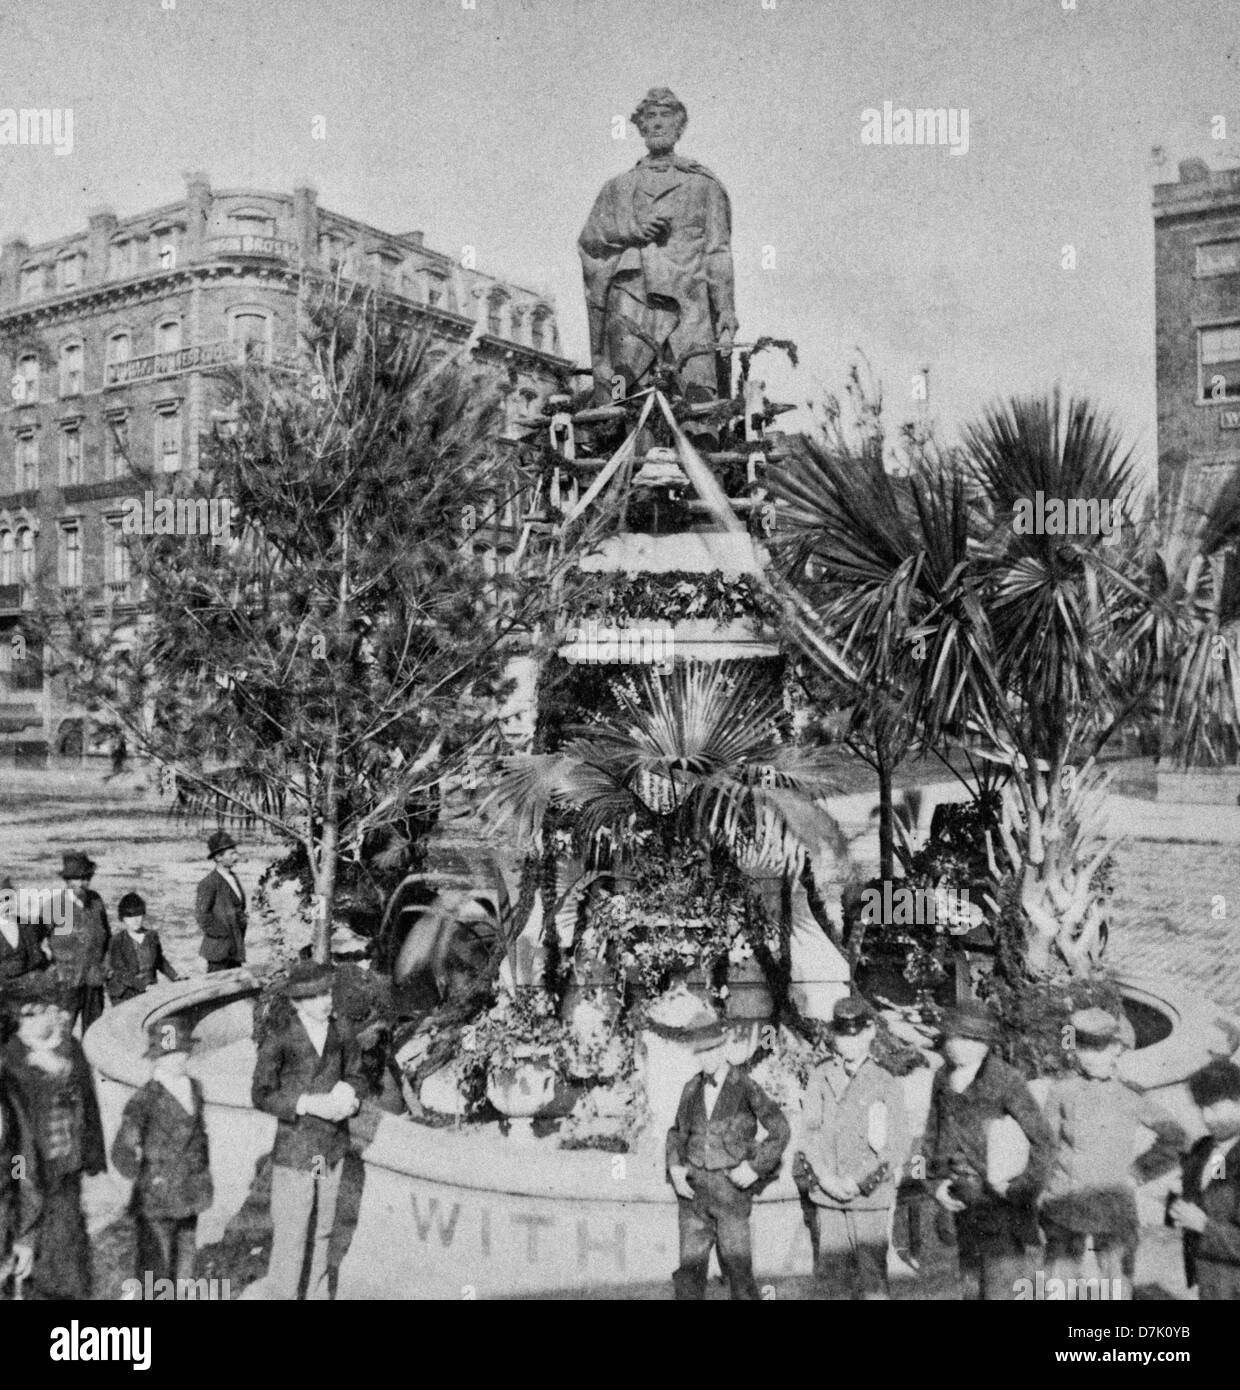 Lincoln Monument, Union Square, Decoration Day, 1876. Crowd gathered in front of statue of Abraham Lincoln in Union Square Park Stock Photo